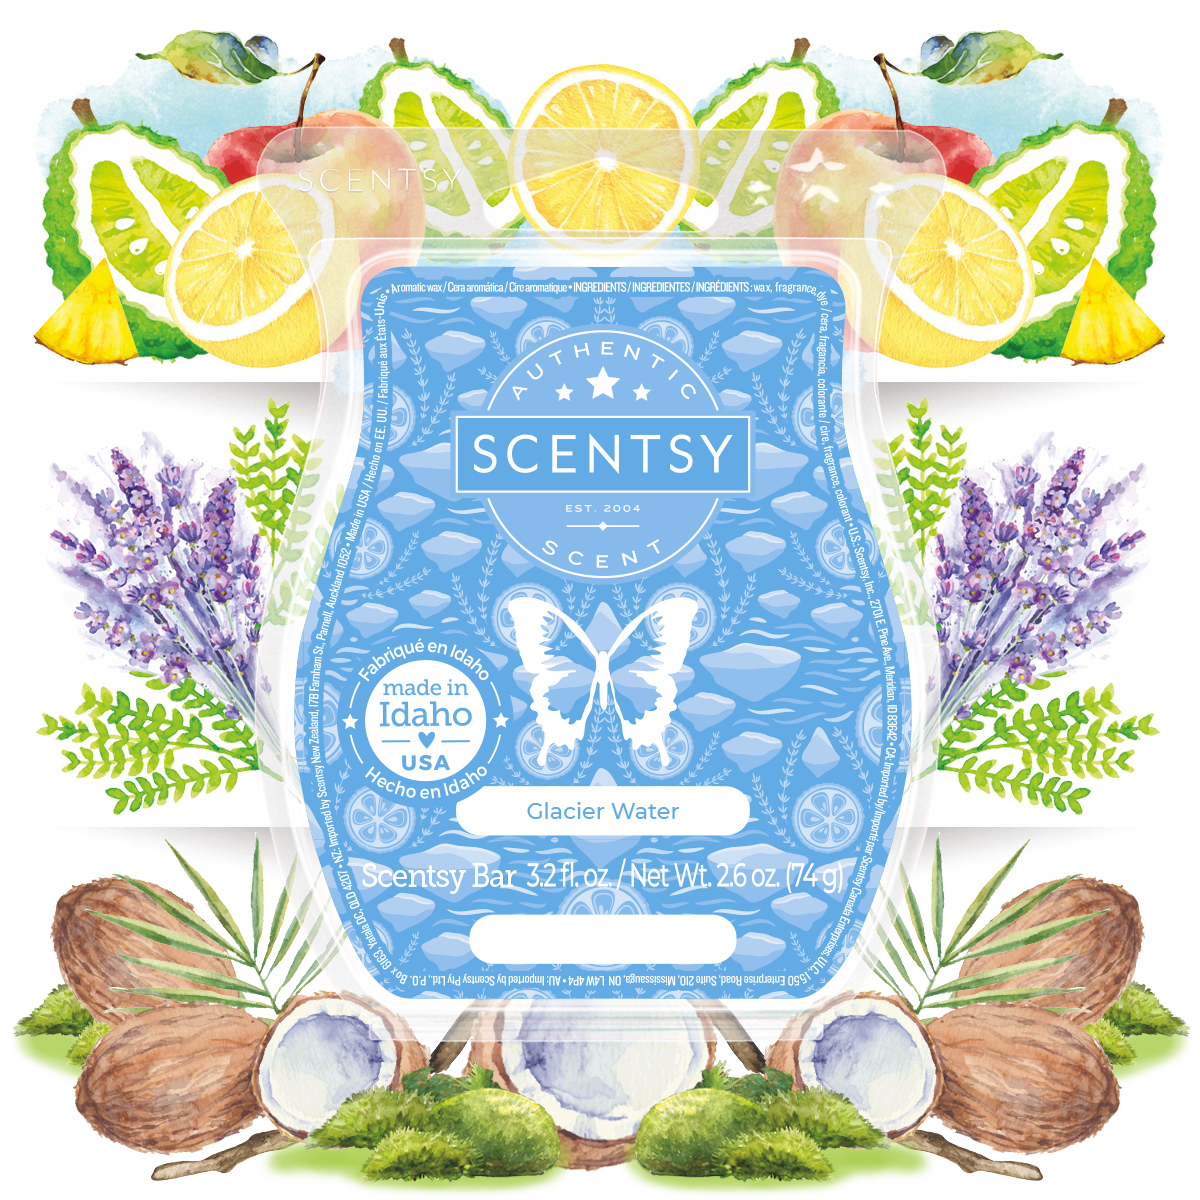 Glacier Waters - Scentsy Scent of the Month - August 2022